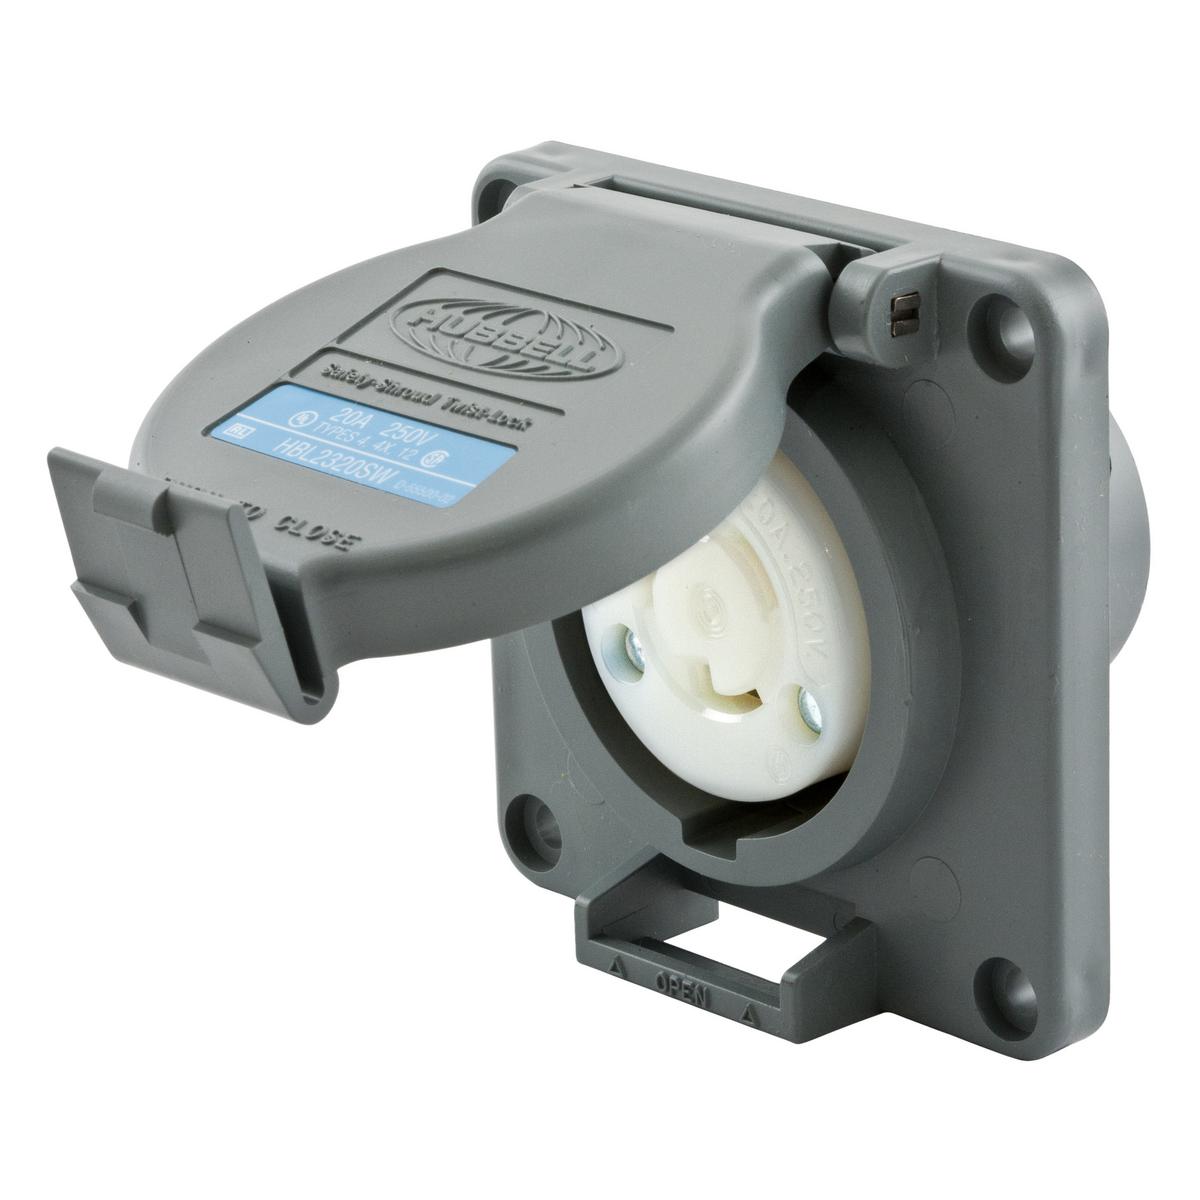 Hubbell HBL2320SW Locking Devices, Twist-Lock®, Industrial, Watertight Safety-Shroud® Receptacle, 20A 250V, 2-Pole 3-Wire Grounding, NEMA L6-20R, Screw Terminal, PBT housing and flange, Gray.  ; UL type 4X environmental seal while in use and when closed ; High impact, ther